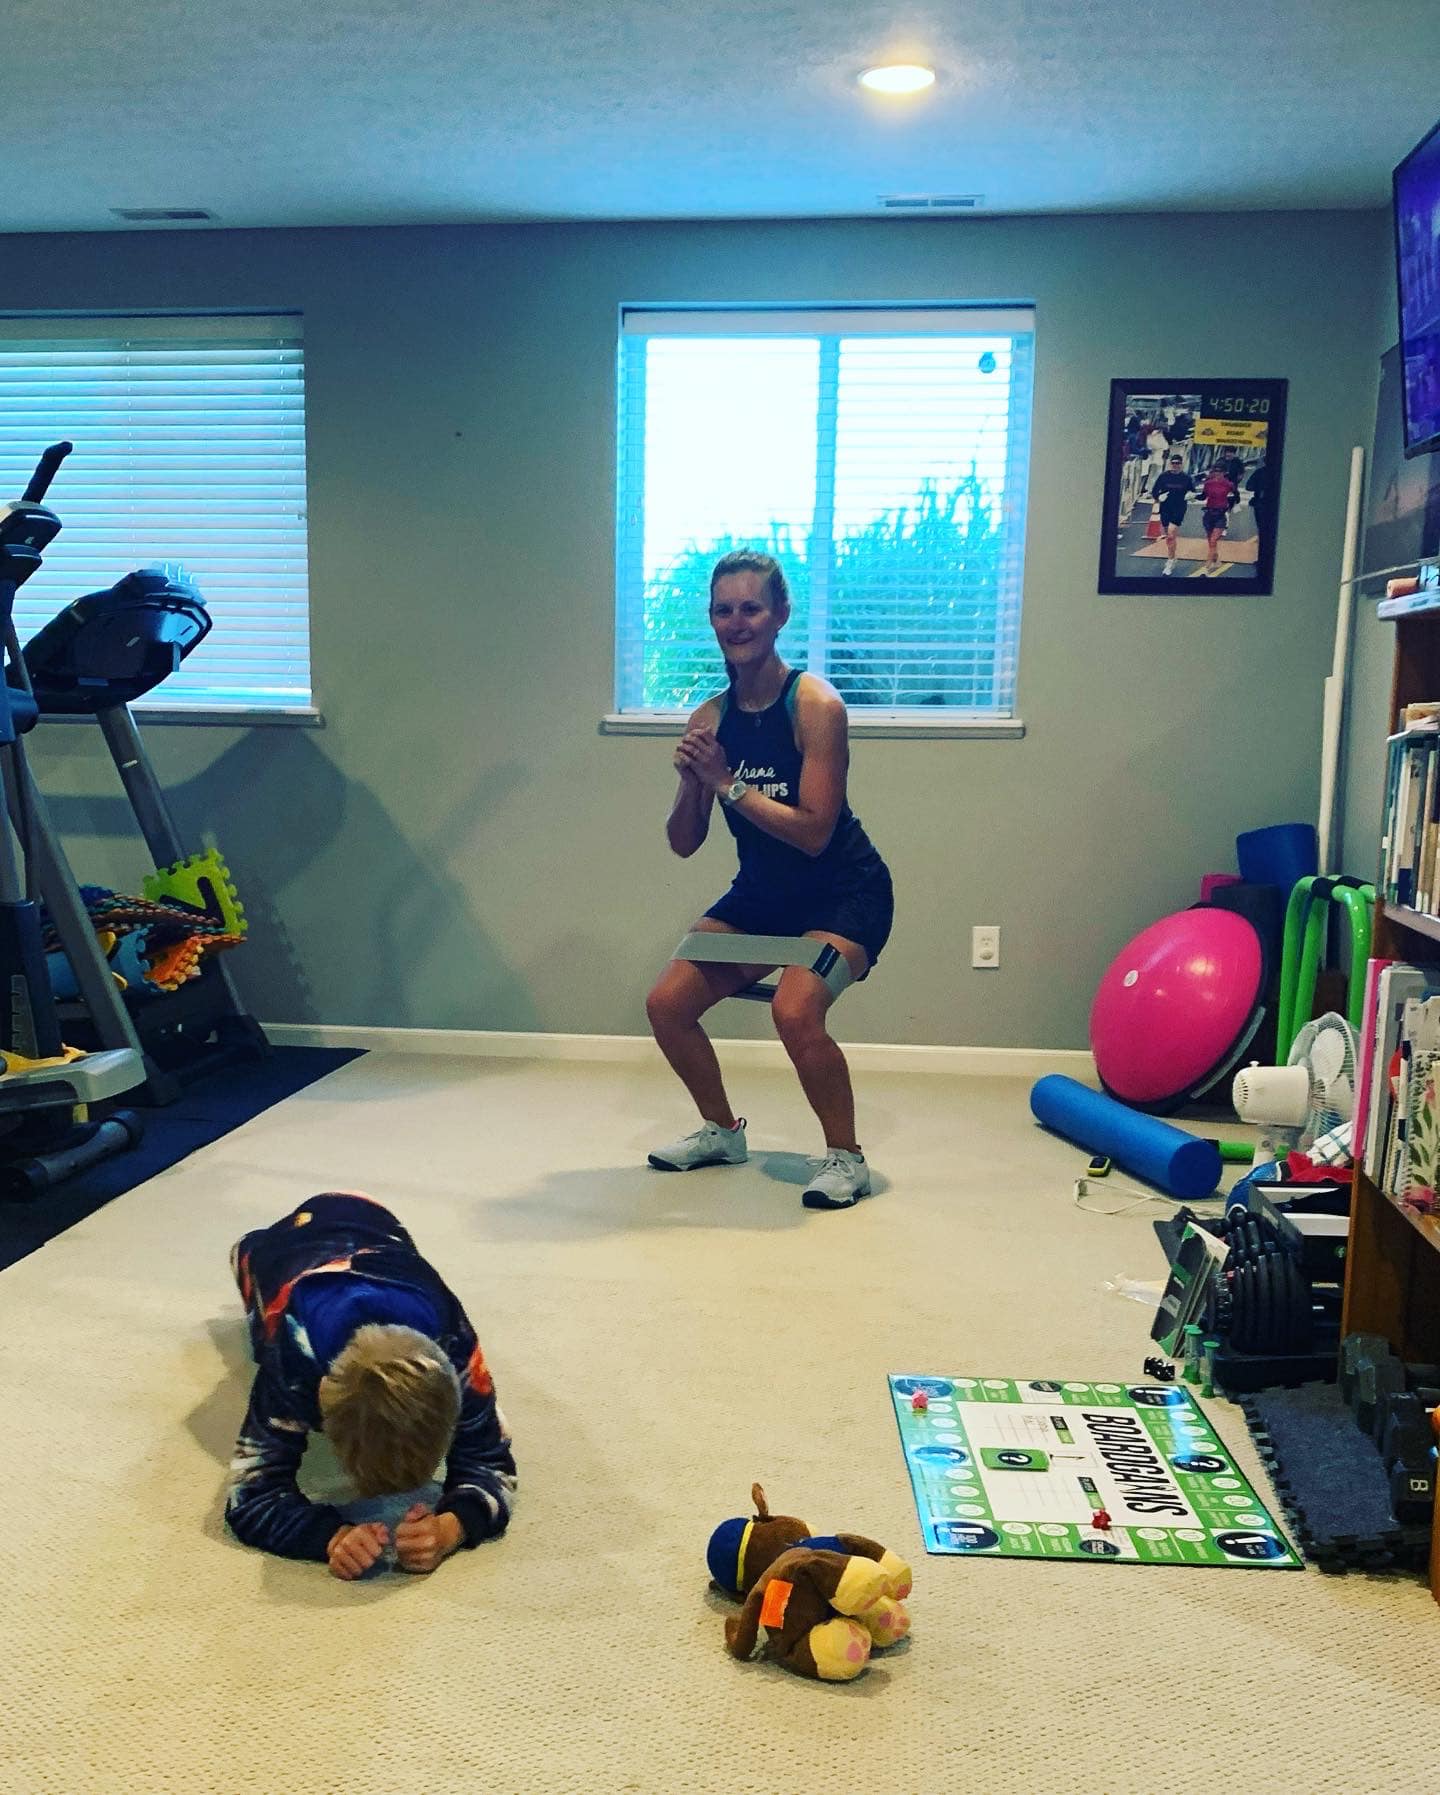 Mom and Kid Using Boardgains at Home - Family Fitness Made Easy and Fun